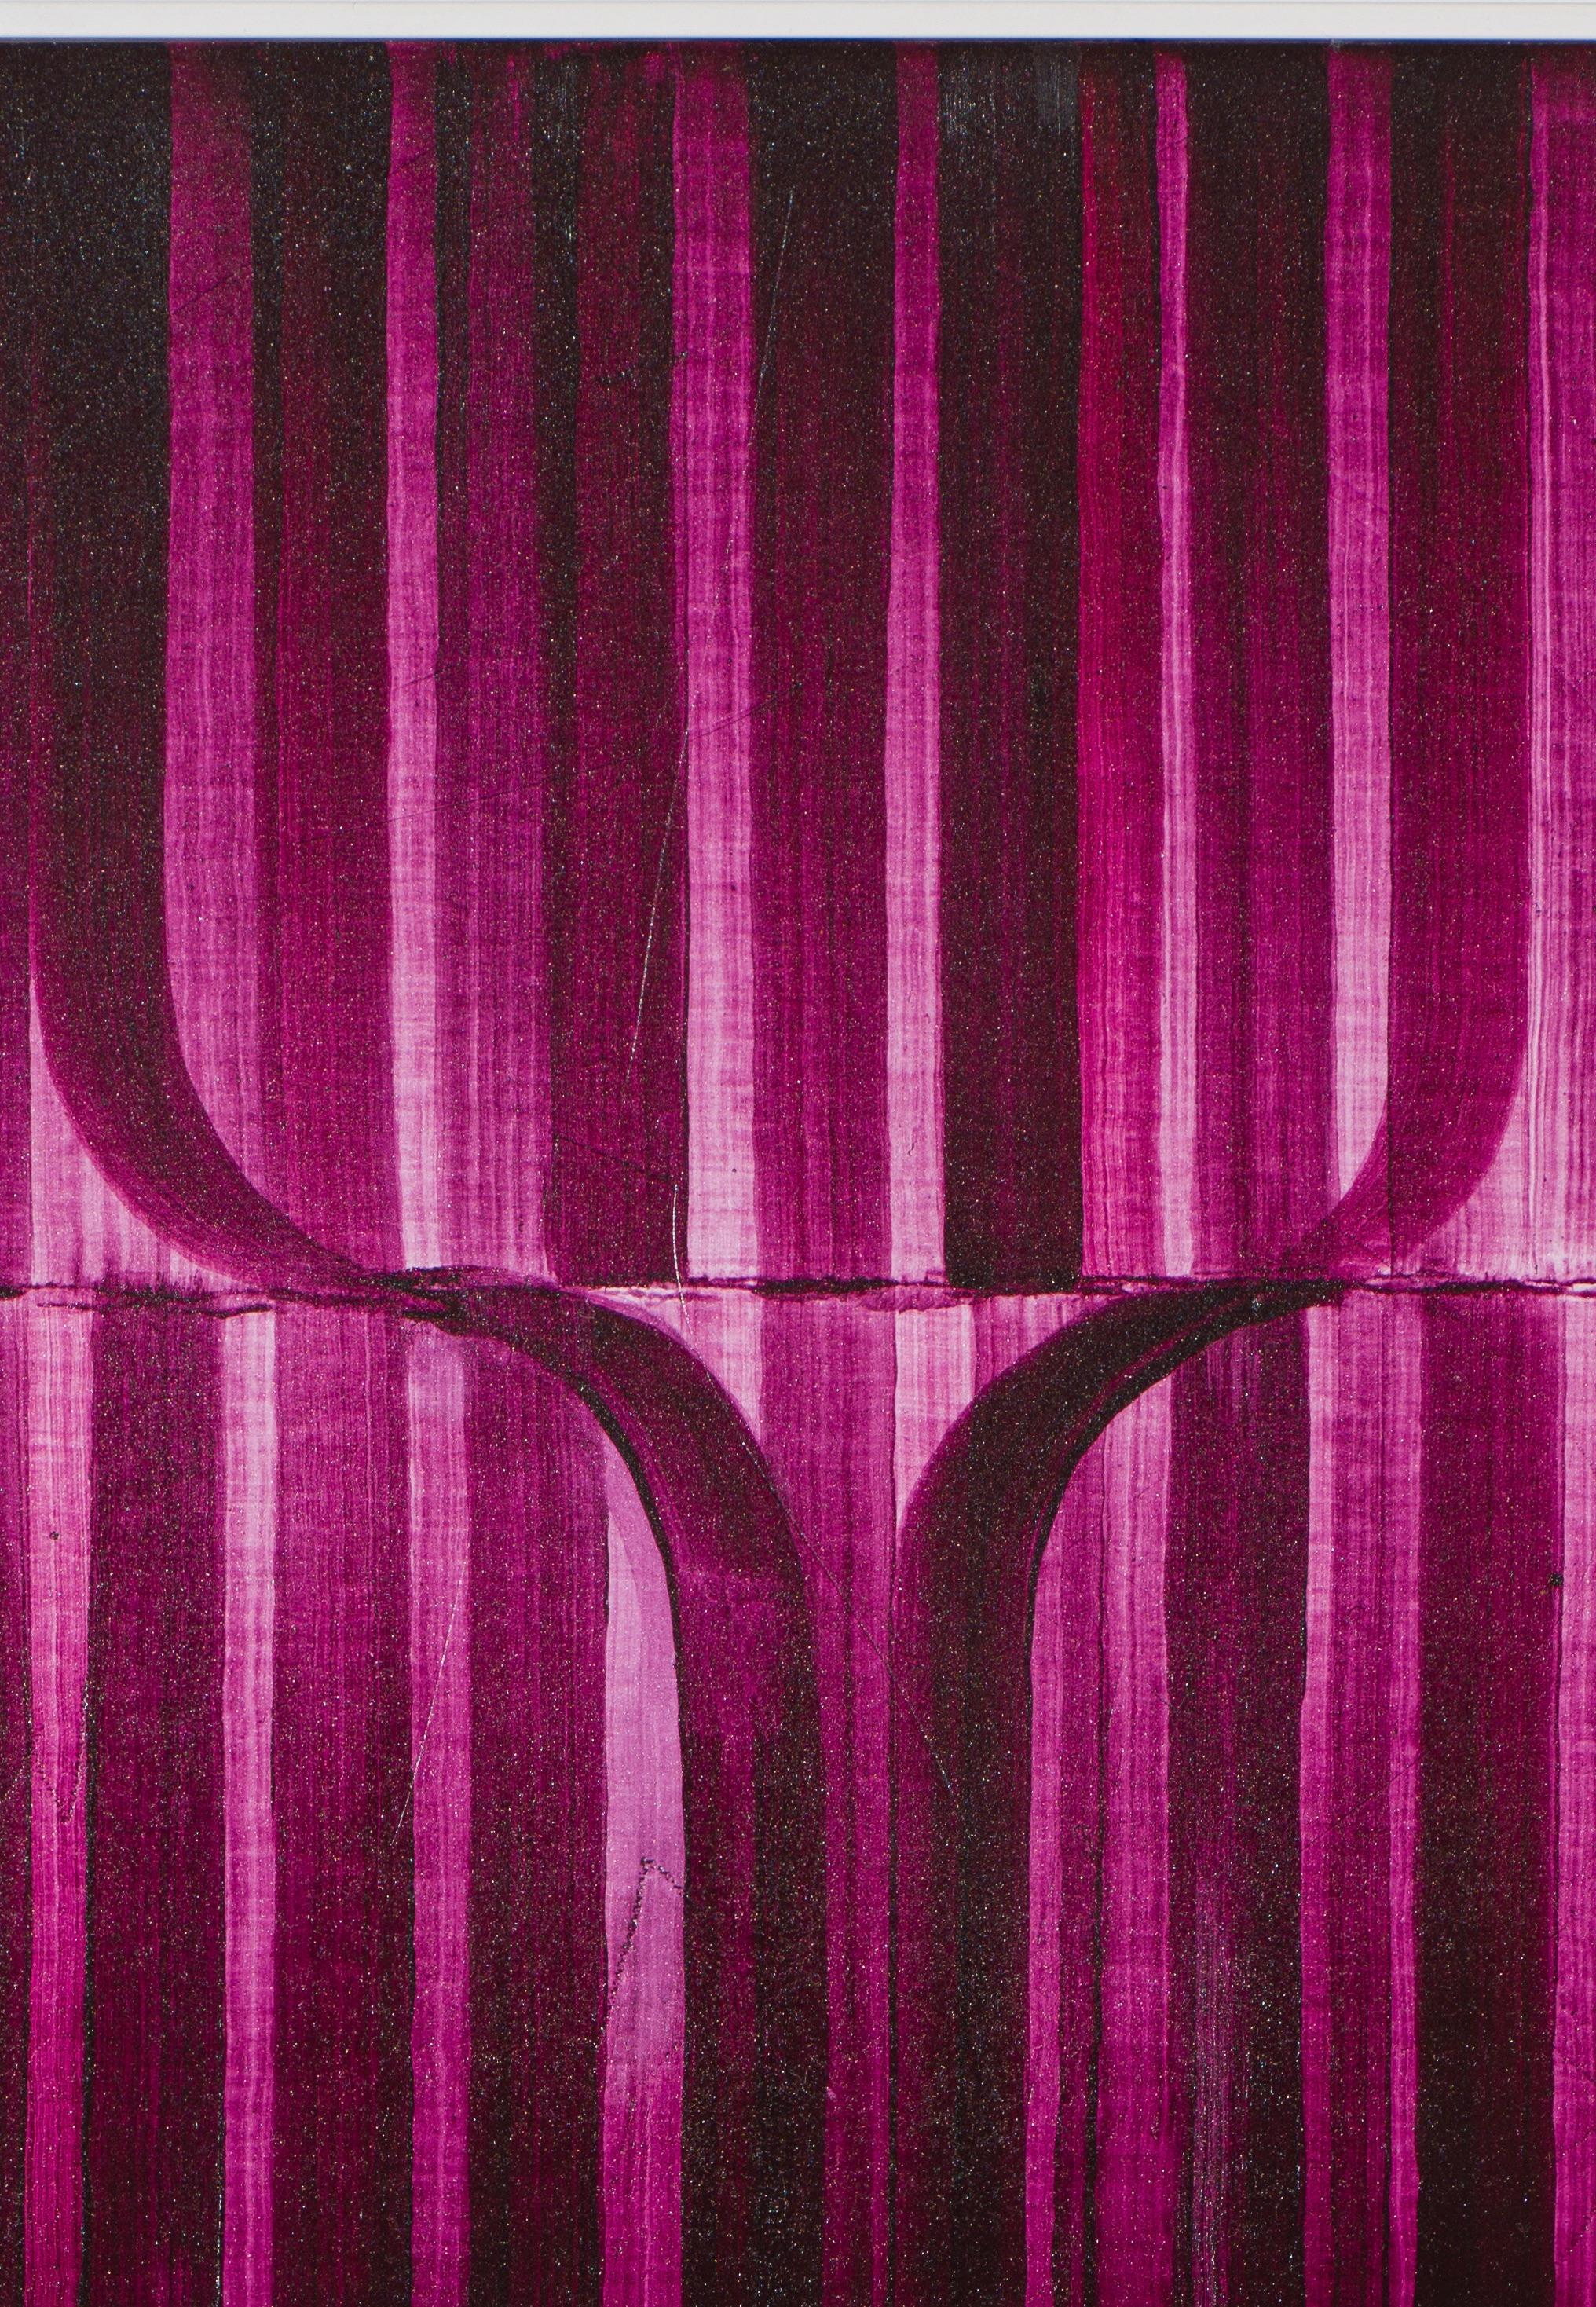 Violet #7 - Painting by Michael Marlowe